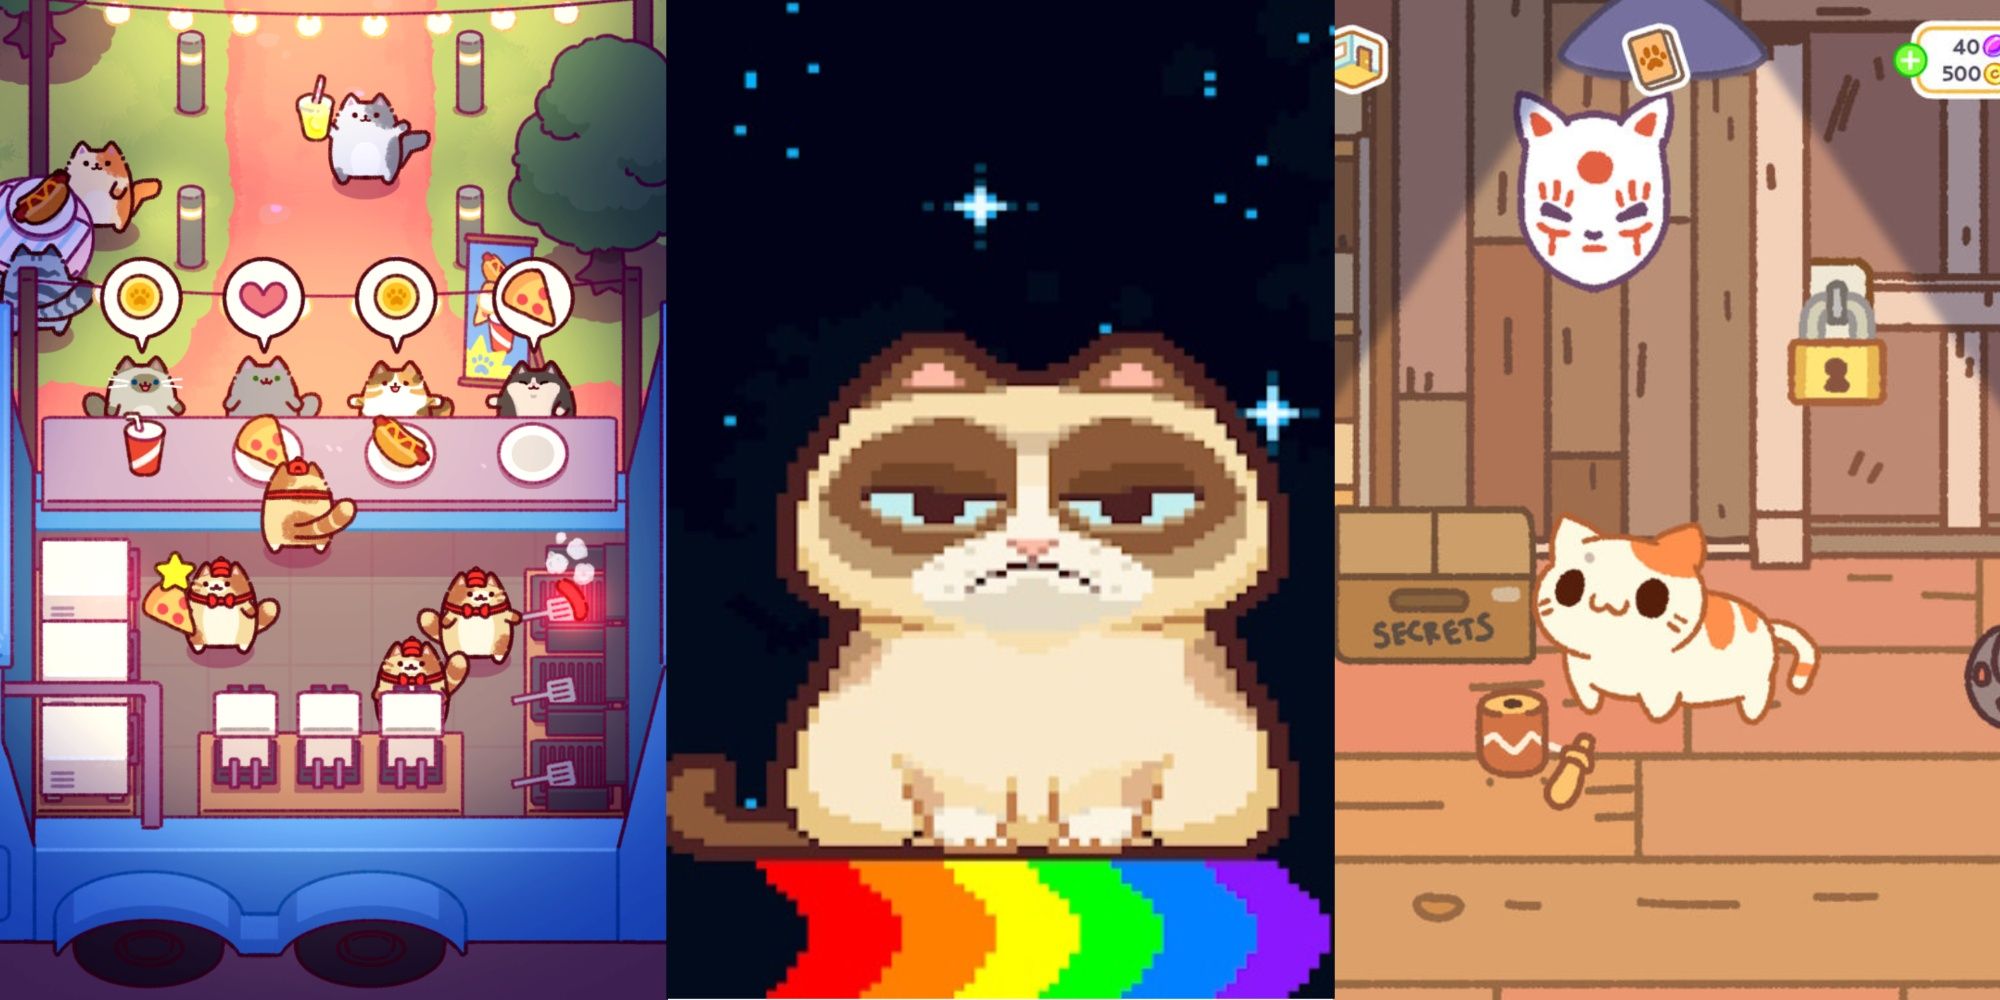 Cat Game on X: Tabby in different moods, which one are you today?  😺😸😻😼😾 - #sundayfunday #mood #ilovecatgame #mobilegame   / X